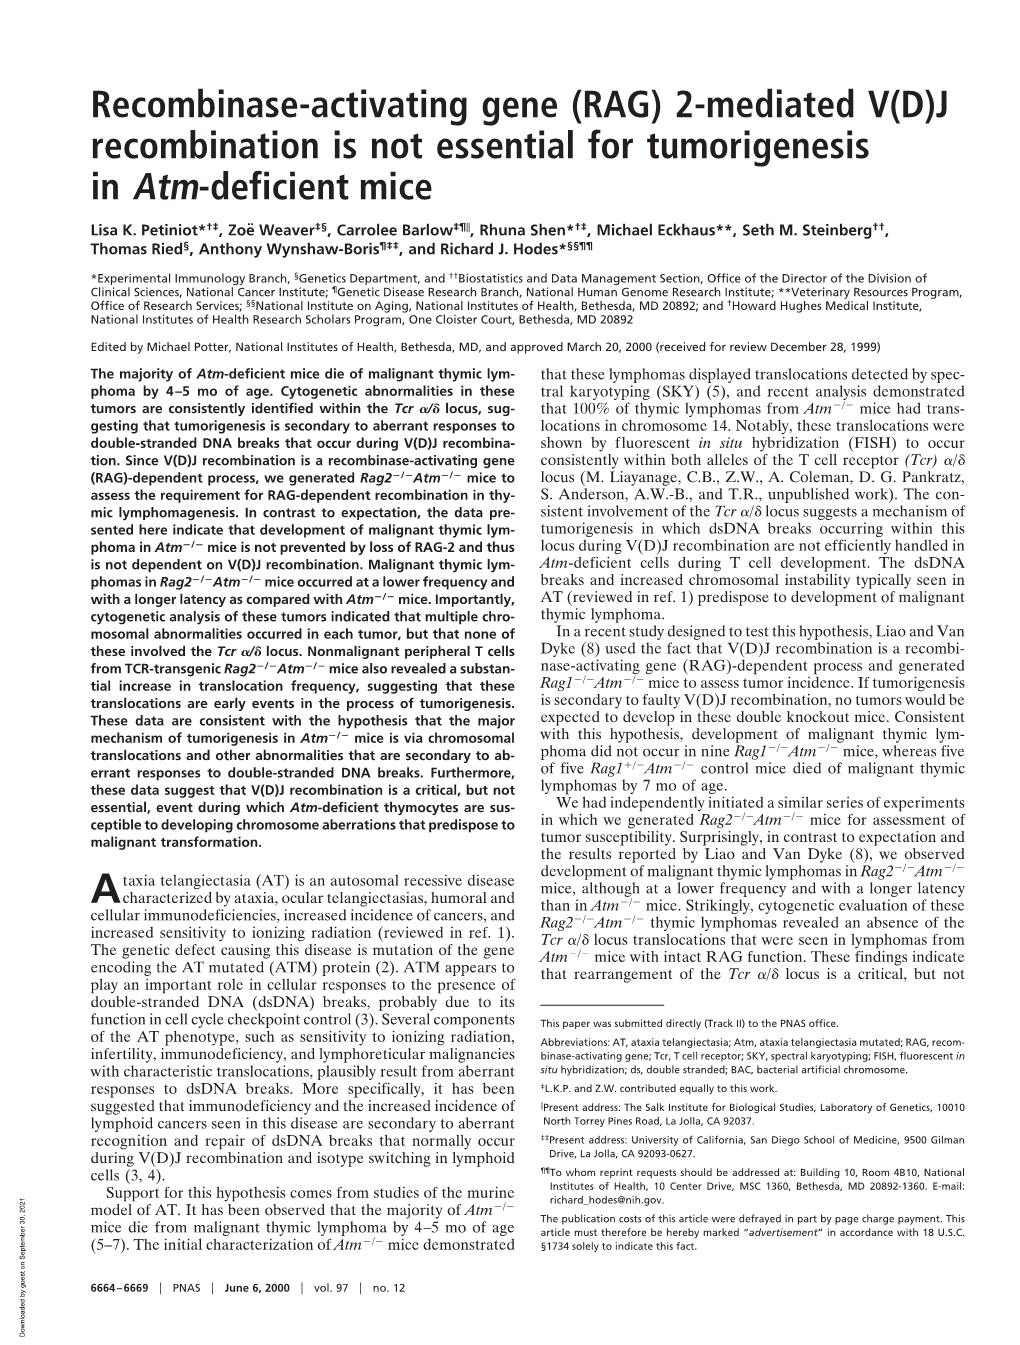 J Recombination Is Not Essential for Tumorigenesis in Atm-Deficient Mice